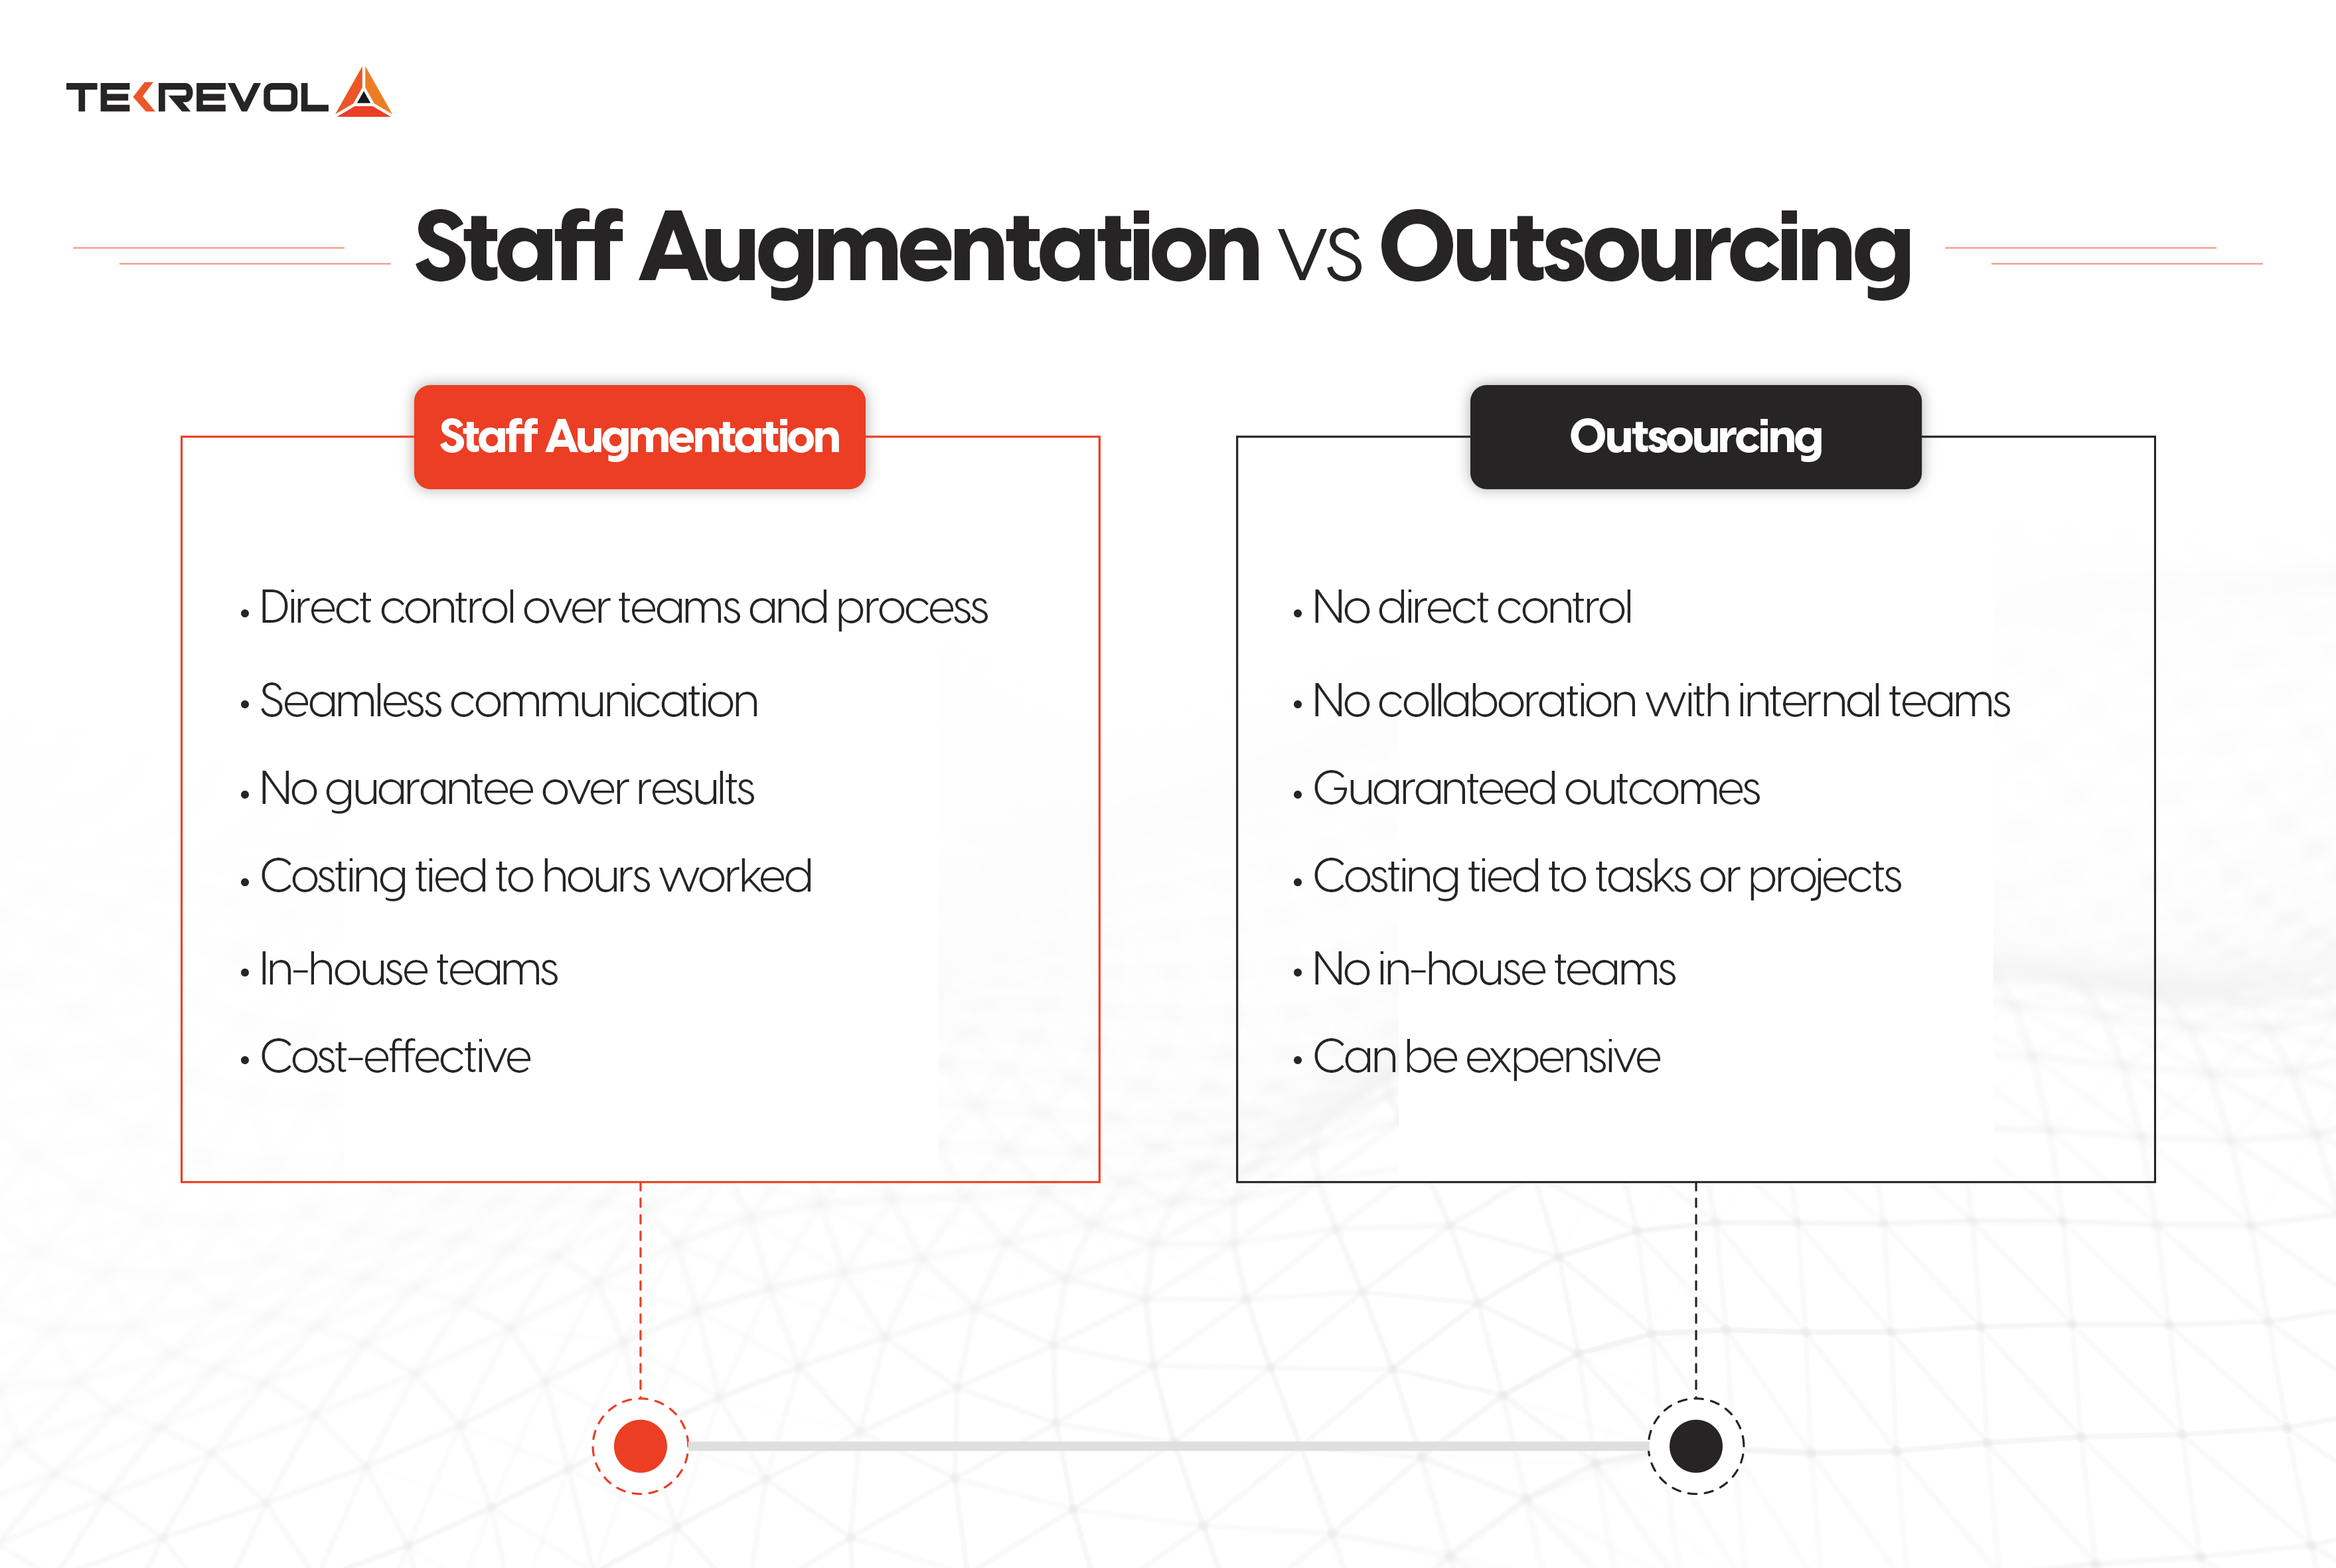 Staff Augmentation vs. Outsourcing 